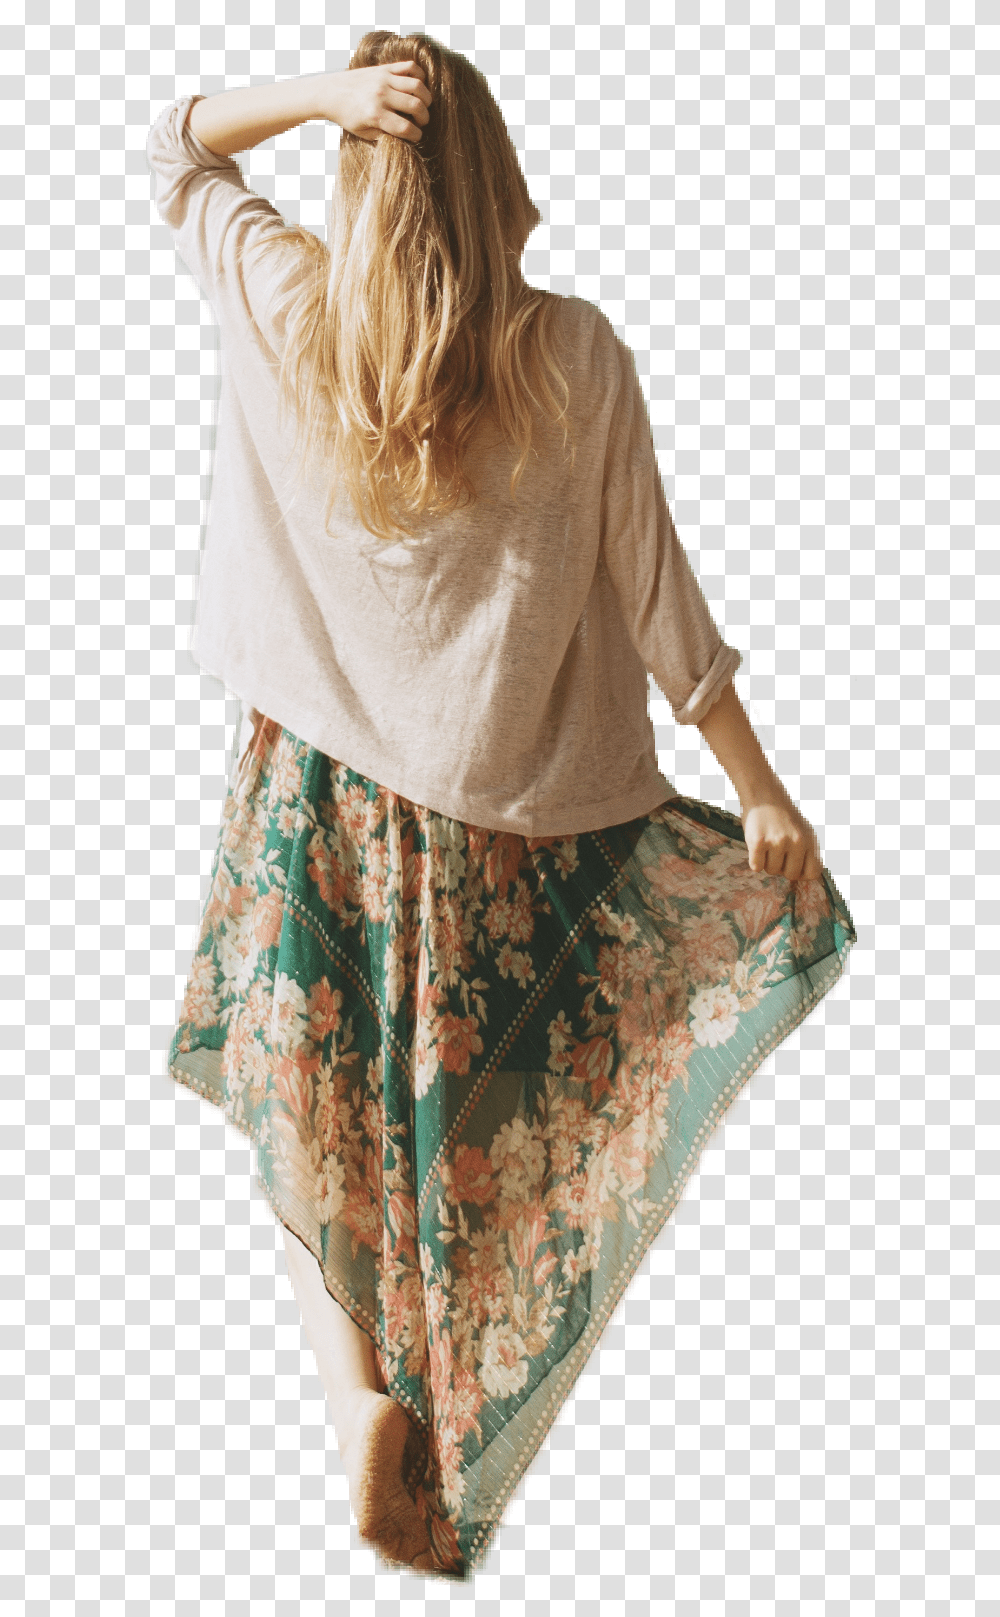 Girl Woman Backview Back View Back Girl Back View, Apparel, Skirt, Blouse Transparent Png